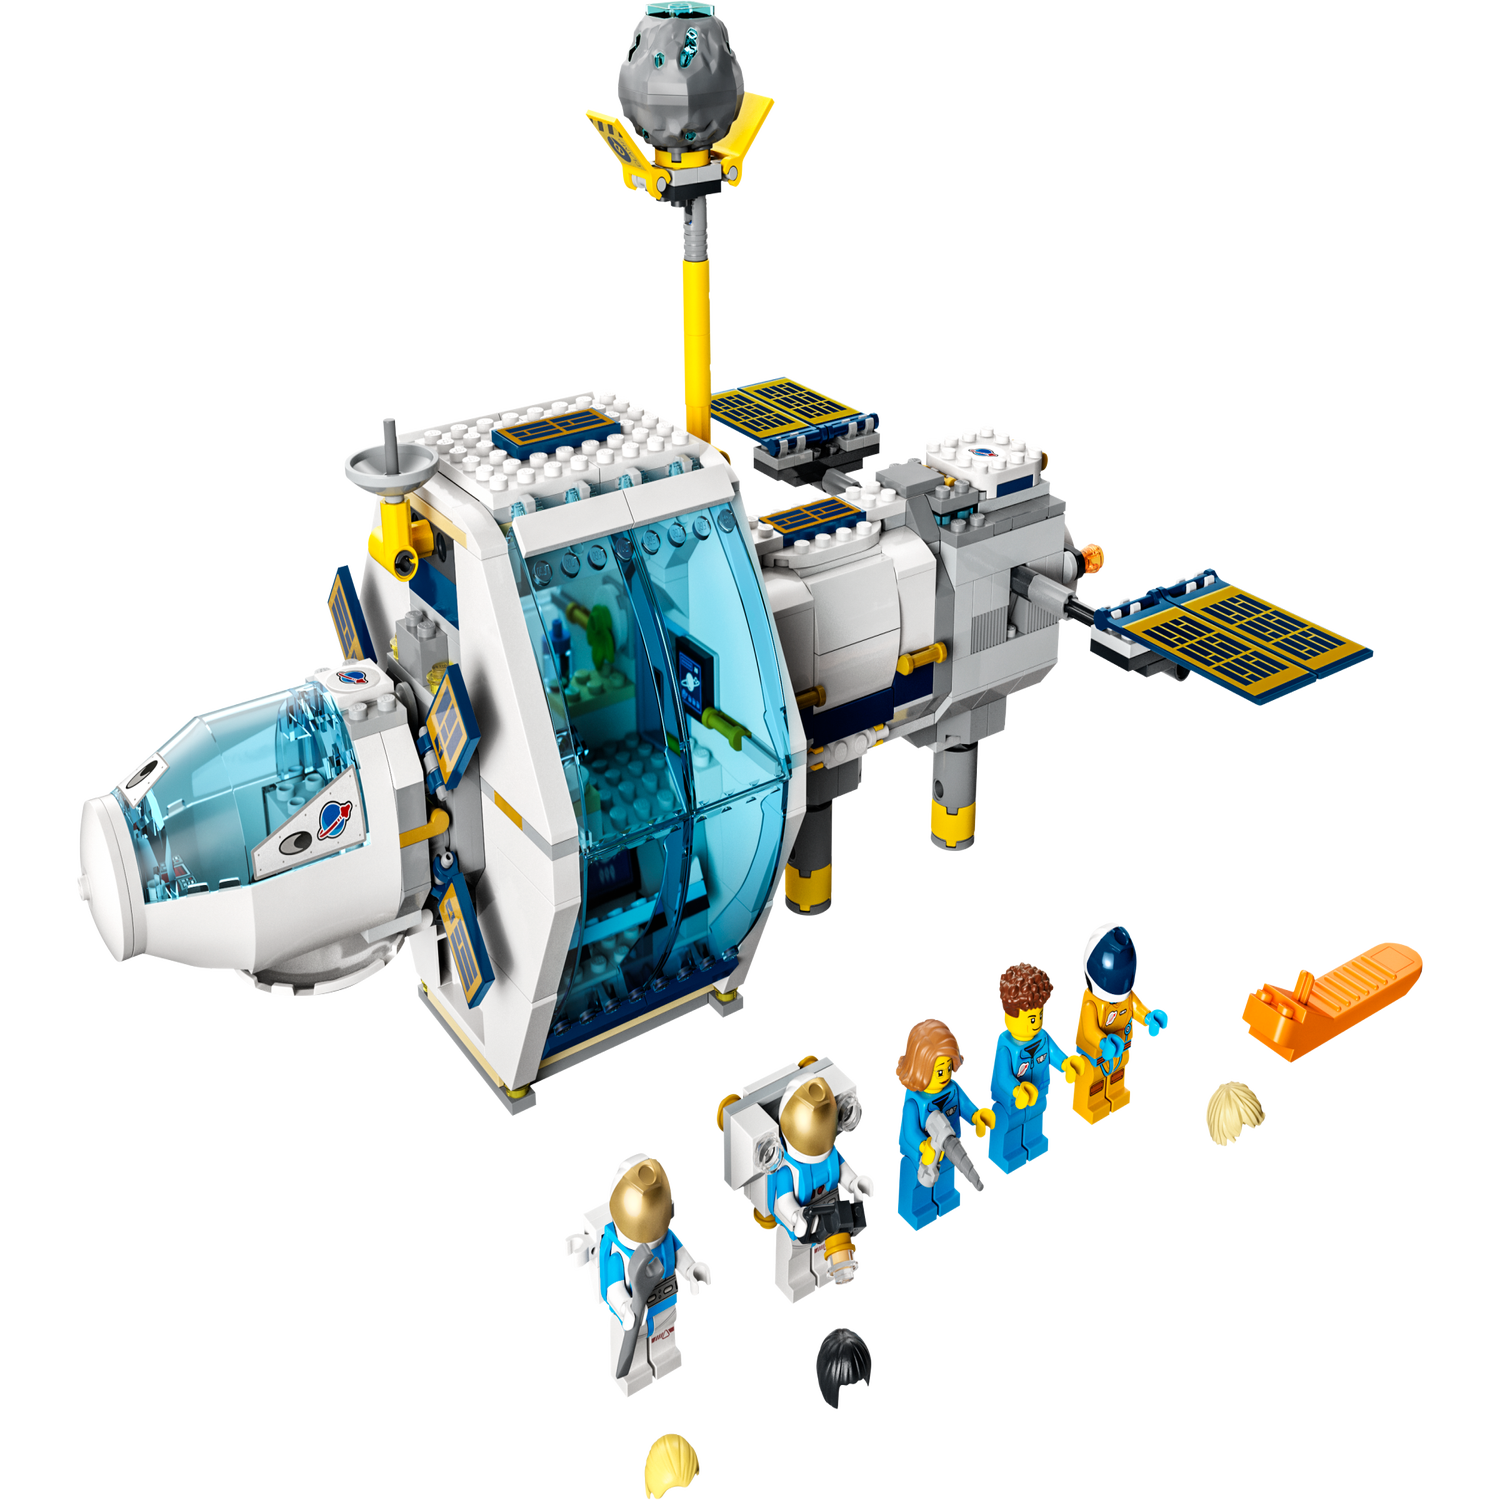 Lunar Space Station 60349 City | Buy online at the Official LEGO® Shop US